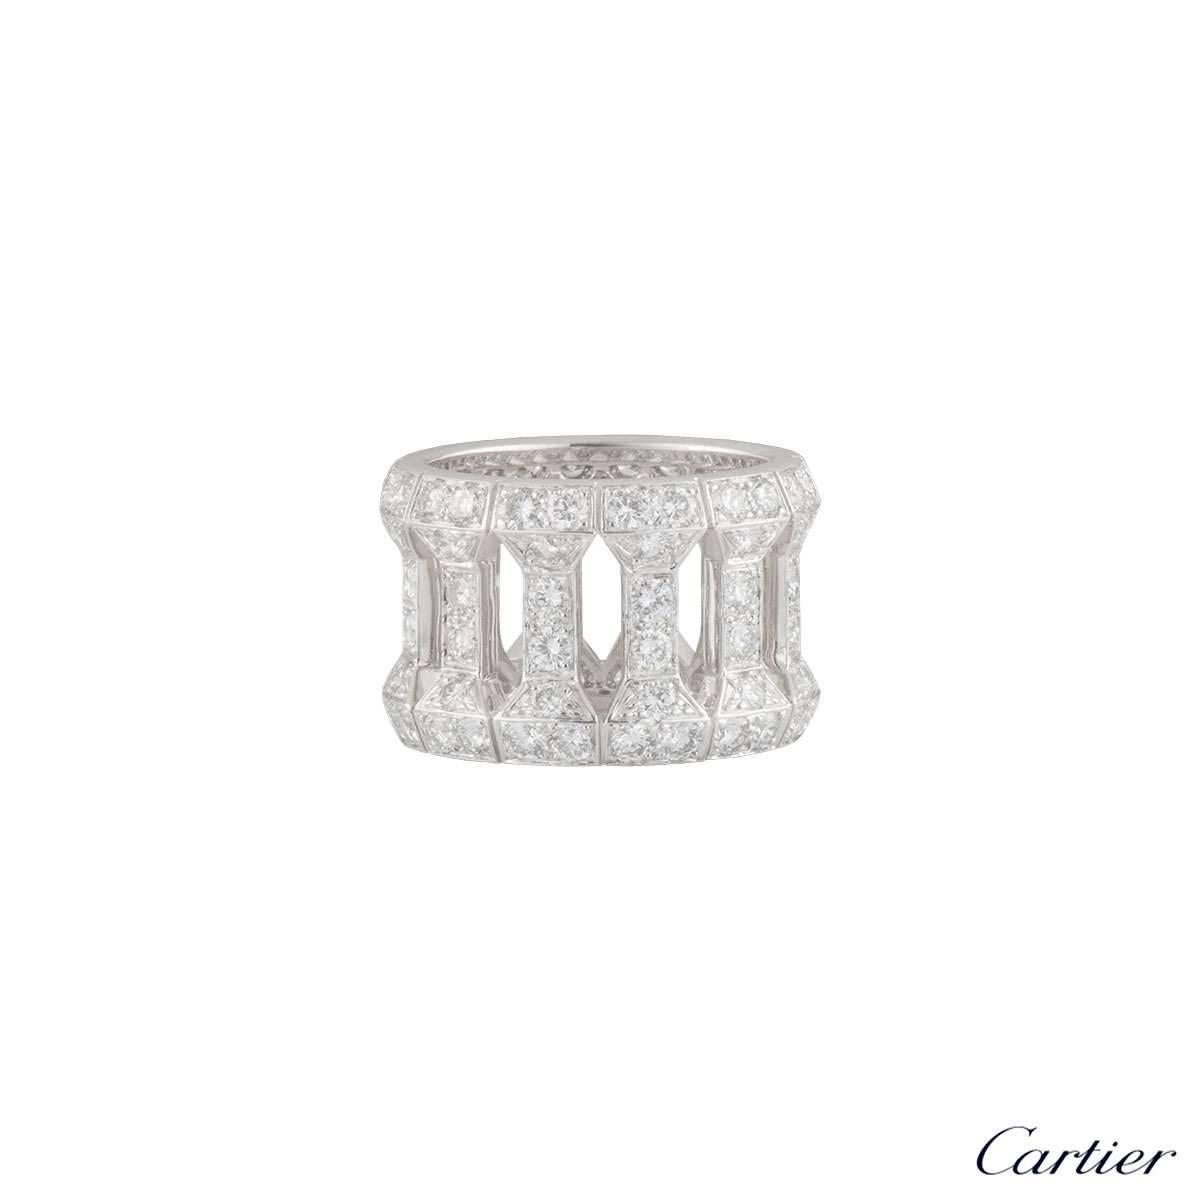 A stunning white gold diamond dress ring by Cartier. The ring is formed of 12 pillar style links, each set with 8 round brilliant cut diamonds. There are 96 diamonds in total with an approximate carat weight of 3.84ct, predominantly G colour and VS